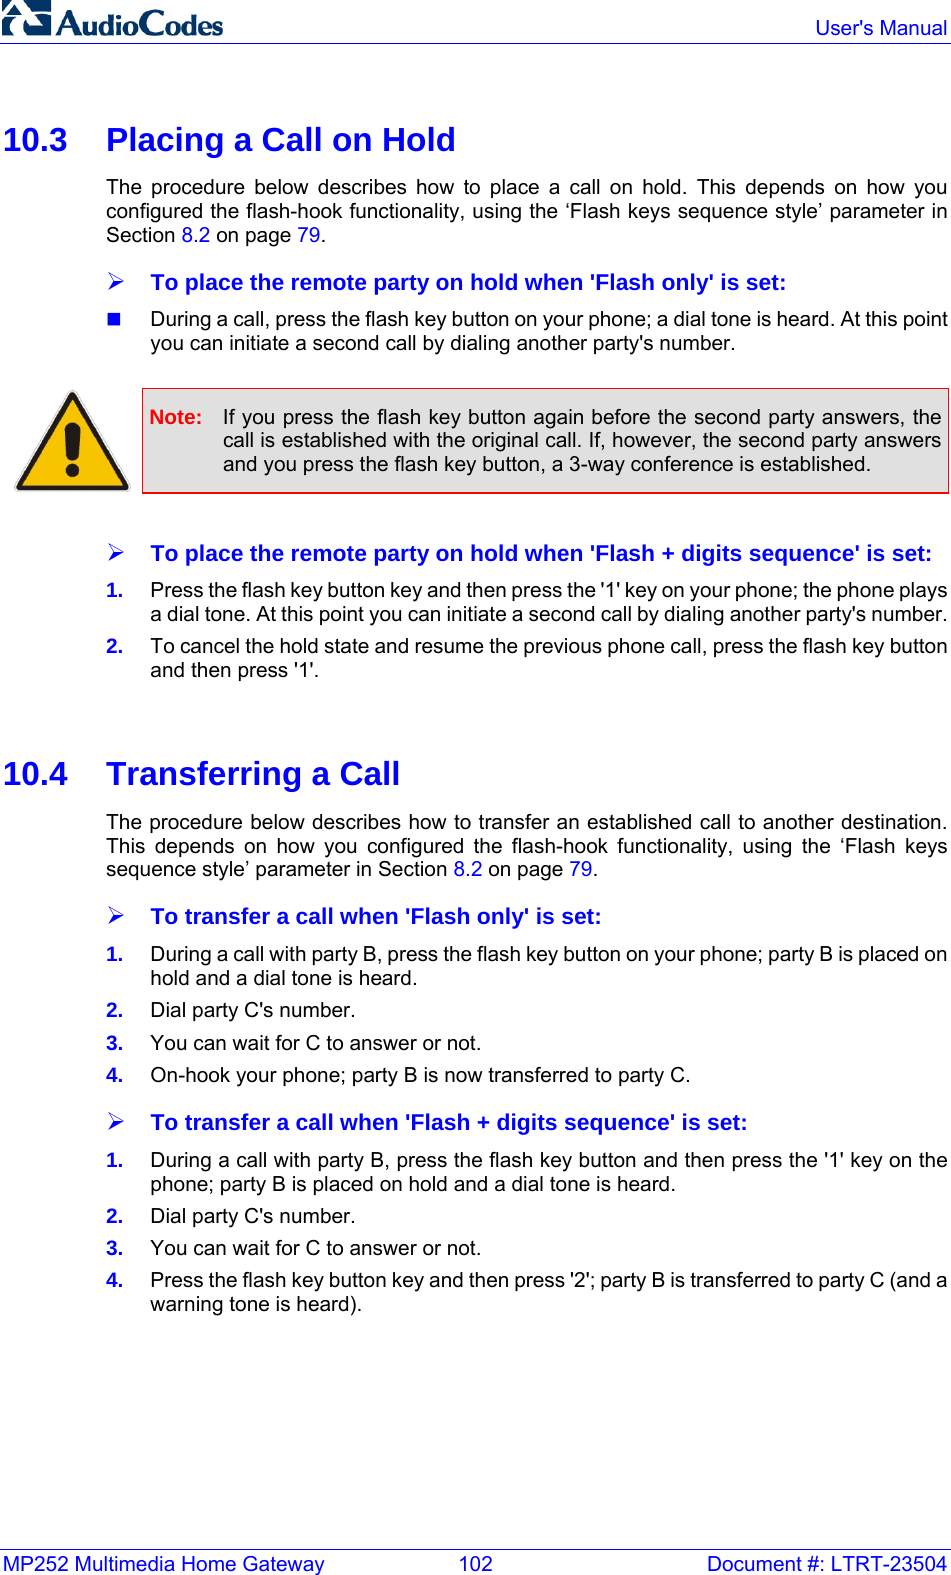 MP252 Multimedia Home Gateway  102  Document #: LTRT-23504  User&apos;s Manual  10.3  Placing a Call on Hold The procedure below describes how to place a call on hold. This depends on how you configured the flash-hook functionality, using the ‘Flash keys sequence style’ parameter in Section 8.2 on page 79. ¾ To place the remote party on hold when &apos;Flash only&apos; is set:  During a call, press the flash key button on your phone; a dial tone is heard. At this point you can initiate a second call by dialing another party&apos;s number.   Note:  If you press the flash key button again before the second party answers, the call is established with the original call. If, however, the second party answers and you press the flash key button, a 3-way conference is established.  ¾ To place the remote party on hold when &apos;Flash + digits sequence&apos; is set: 1.  Press the flash key button key and then press the &apos;1&apos; key on your phone; the phone plays a dial tone. At this point you can initiate a second call by dialing another party&apos;s number. 2.  To cancel the hold state and resume the previous phone call, press the flash key button and then press &apos;1&apos;.   10.4  Transferring a Call The procedure below describes how to transfer an established call to another destination. This depends on how you configured the flash-hook functionality, using the ‘Flash keys sequence style’ parameter in Section 8.2 on page 79. ¾ To transfer a call when &apos;Flash only&apos; is set: 1.  During a call with party B, press the flash key button on your phone; party B is placed on hold and a dial tone is heard. 2.  Dial party C&apos;s number. 3.  You can wait for C to answer or not. 4.  On-hook your phone; party B is now transferred to party C. ¾ To transfer a call when &apos;Flash + digits sequence&apos; is set: 1.  During a call with party B, press the flash key button and then press the &apos;1&apos; key on the phone; party B is placed on hold and a dial tone is heard. 2.  Dial party C&apos;s number. 3.  You can wait for C to answer or not. 4.  Press the flash key button key and then press &apos;2&apos;; party B is transferred to party C (and a warning tone is heard).   